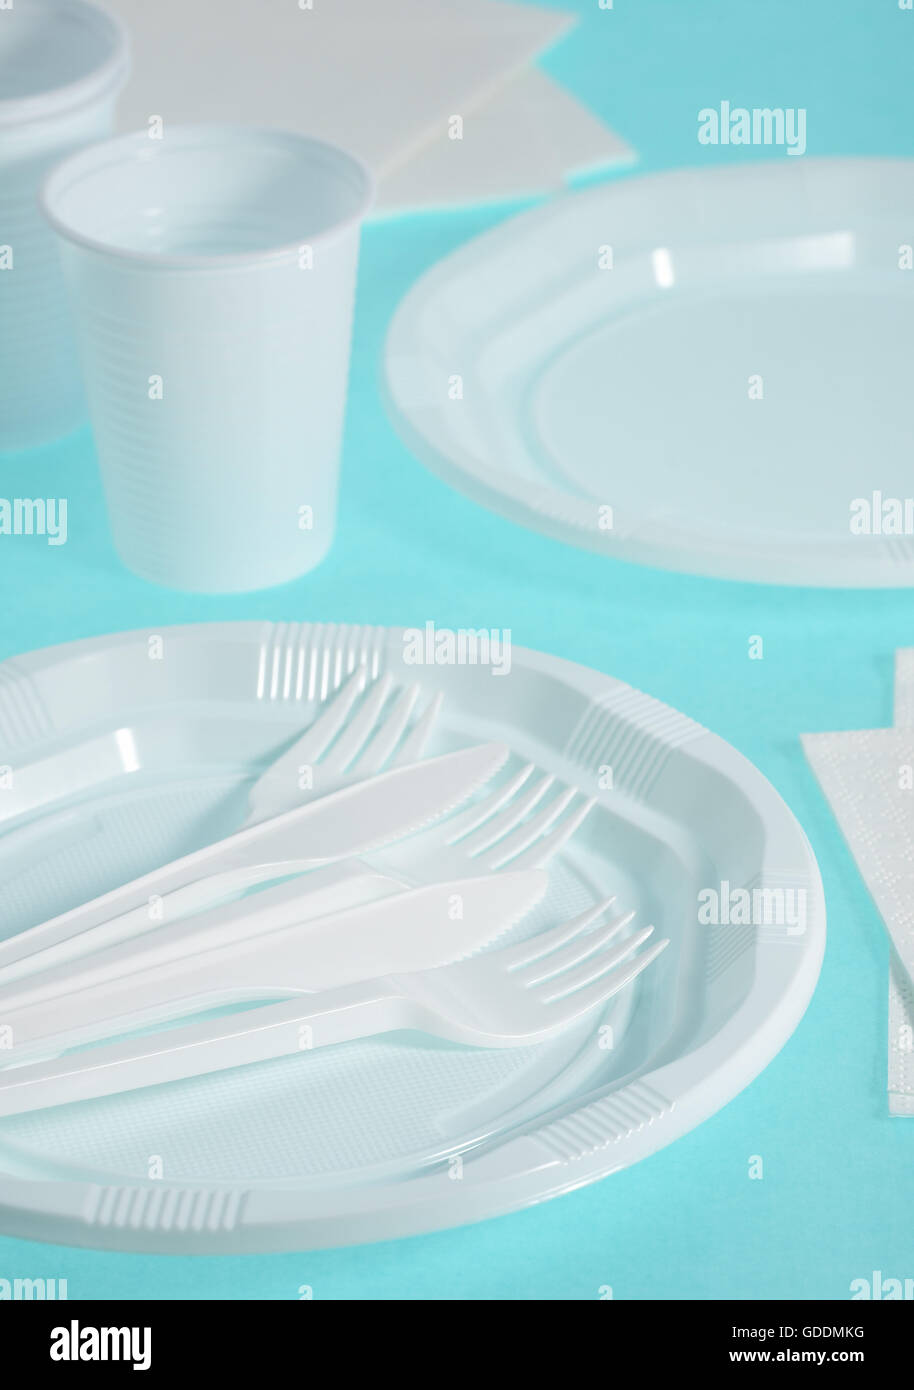 PLASTIC PLACE SETTING AND PAPER NAPKIN Stock Photo